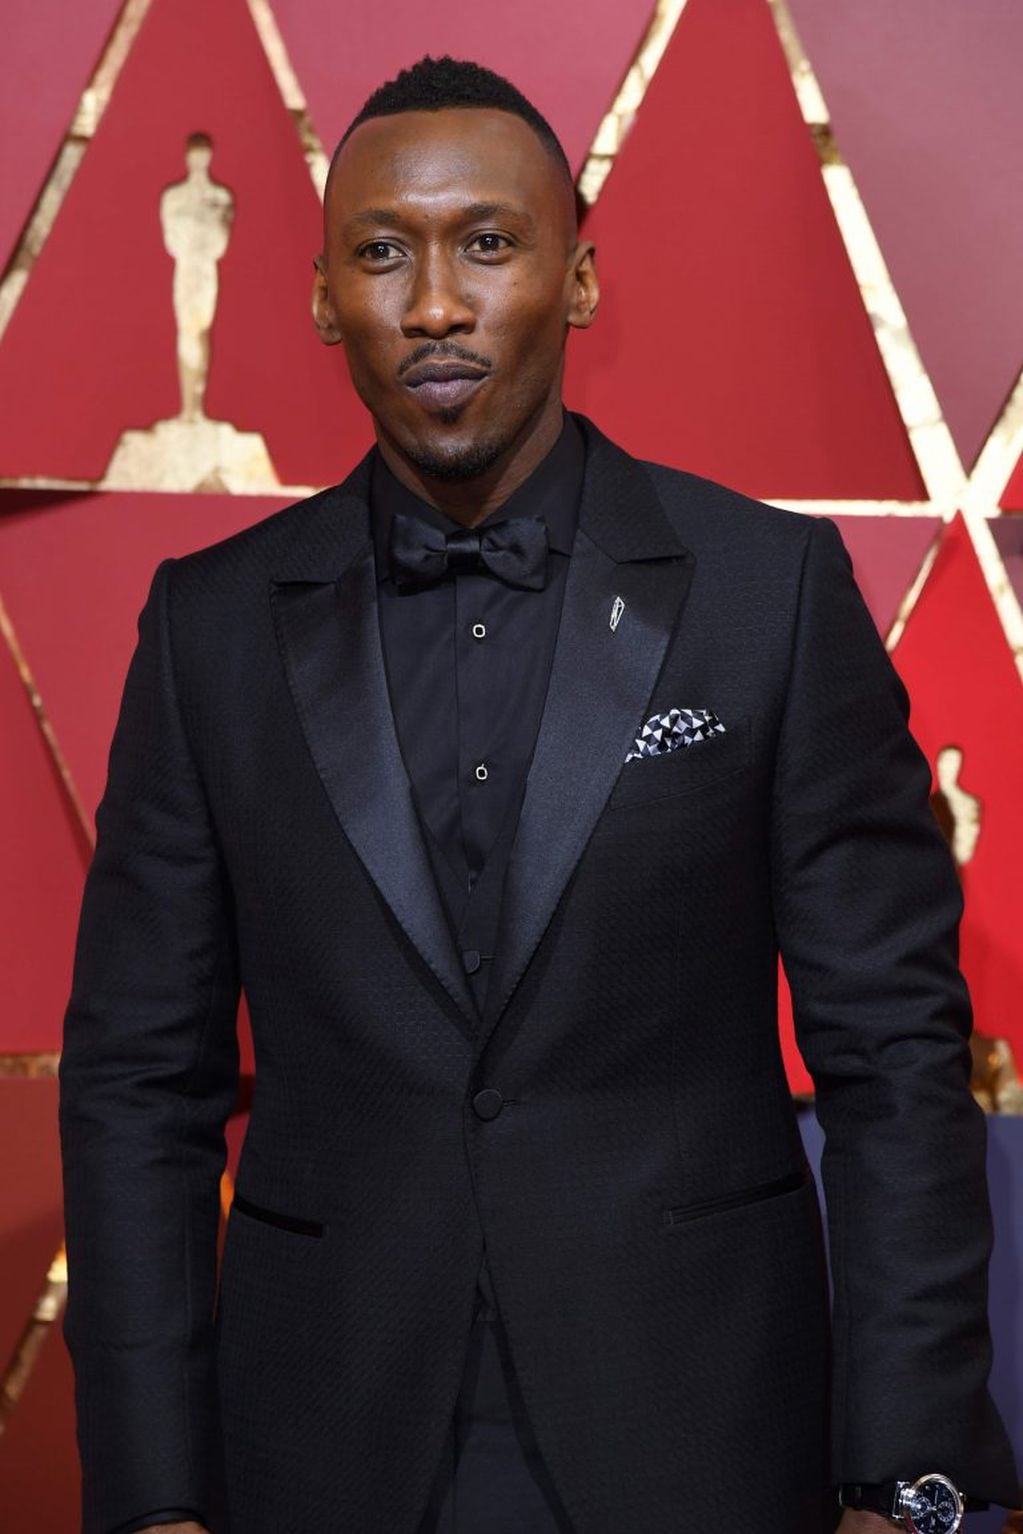 Nominee for Best Supporting Actor in "Moonlight" Mahershala Ali poses as he arrives on the red carpet for the 89th Oscars on February 26, 2017 in Hollywood, California.  / AFP PHOTO / ANGELA WEISS